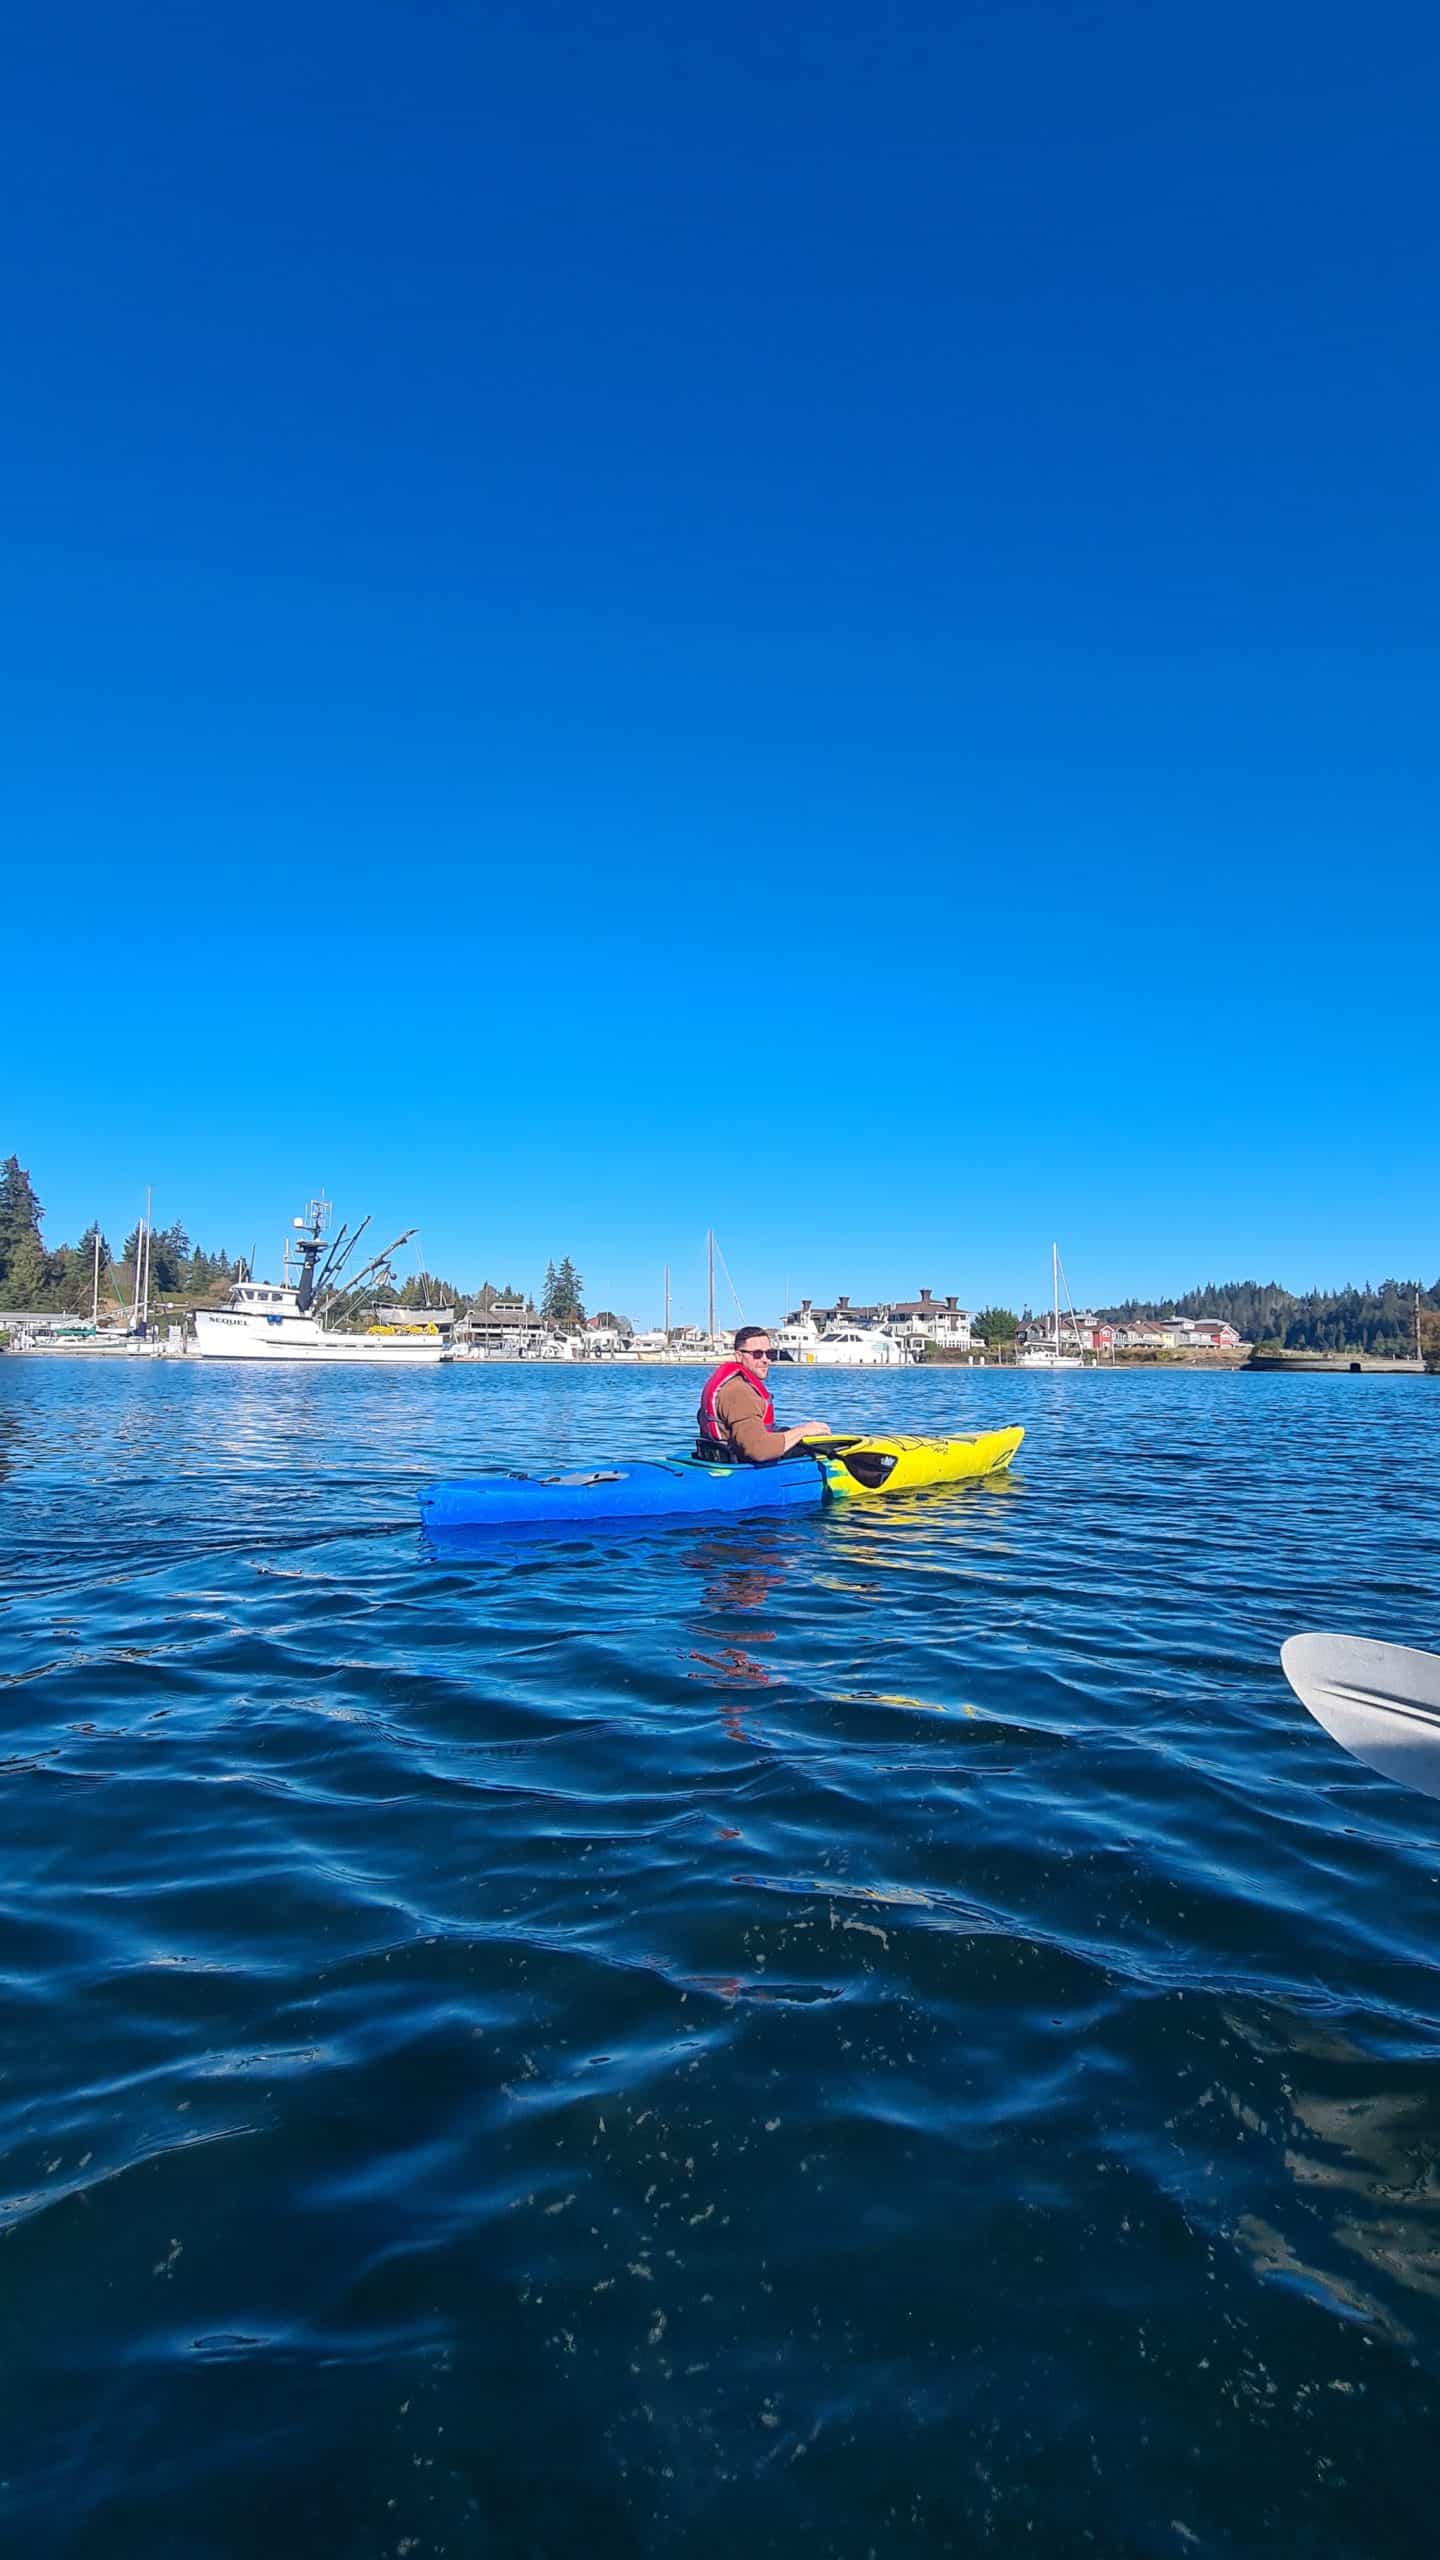 TUNE employees had a blast kayaking in Port Ludlow